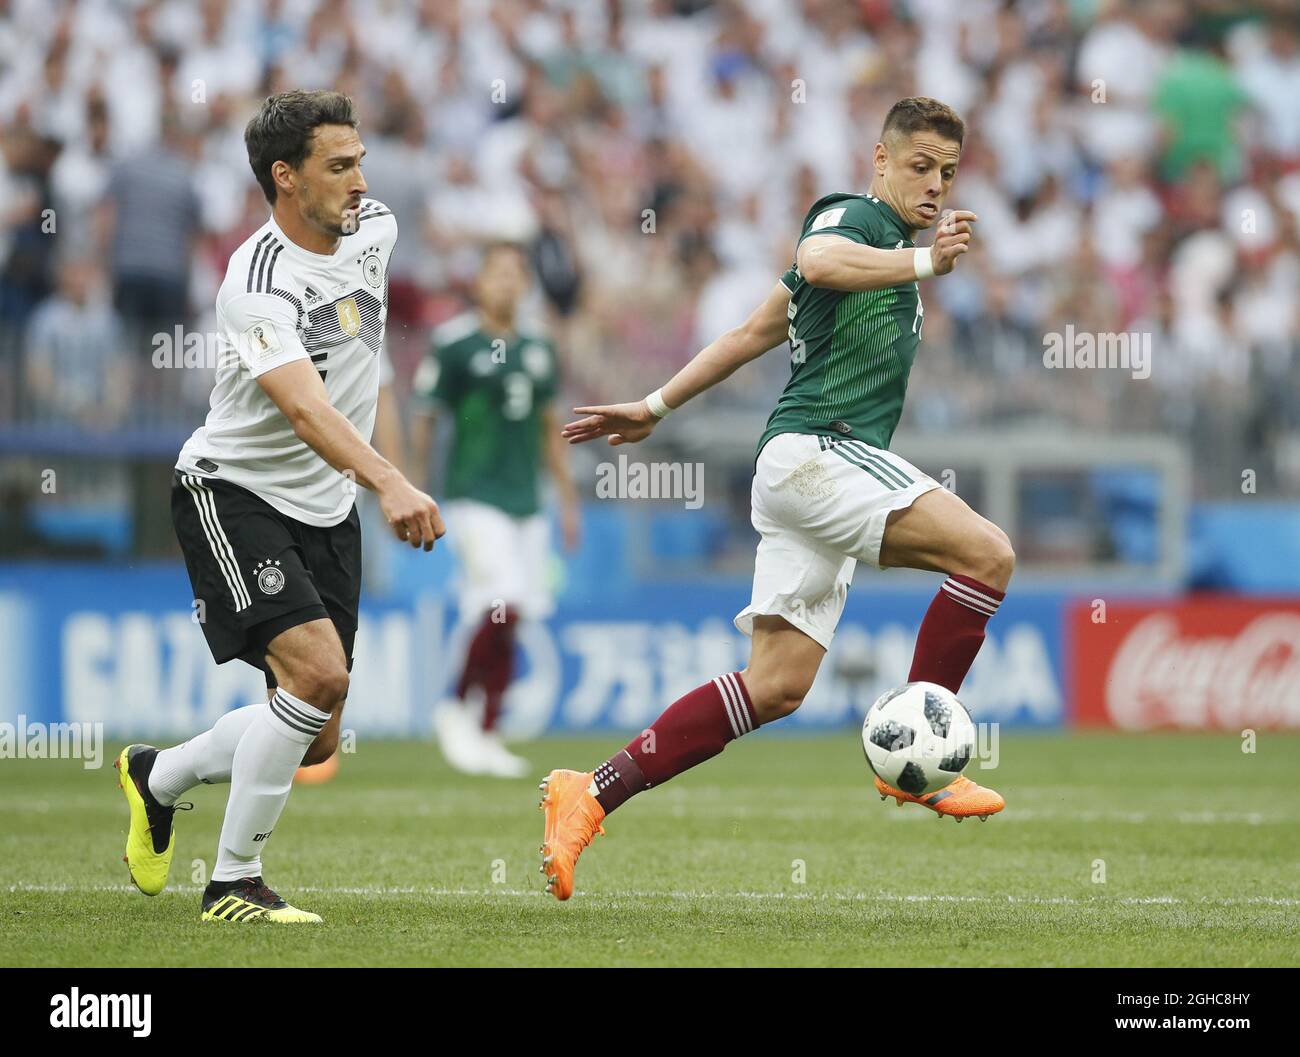 Mats Hummels of Germany and Javier Hernandez of Mexico during the FIFA World Cup 2018 Group F match at the Luzhniki Stadium, Moscow. Picture date 17th June 2018. Picture credit should read: David Klein/Sportimage via PA Images Stock Photo